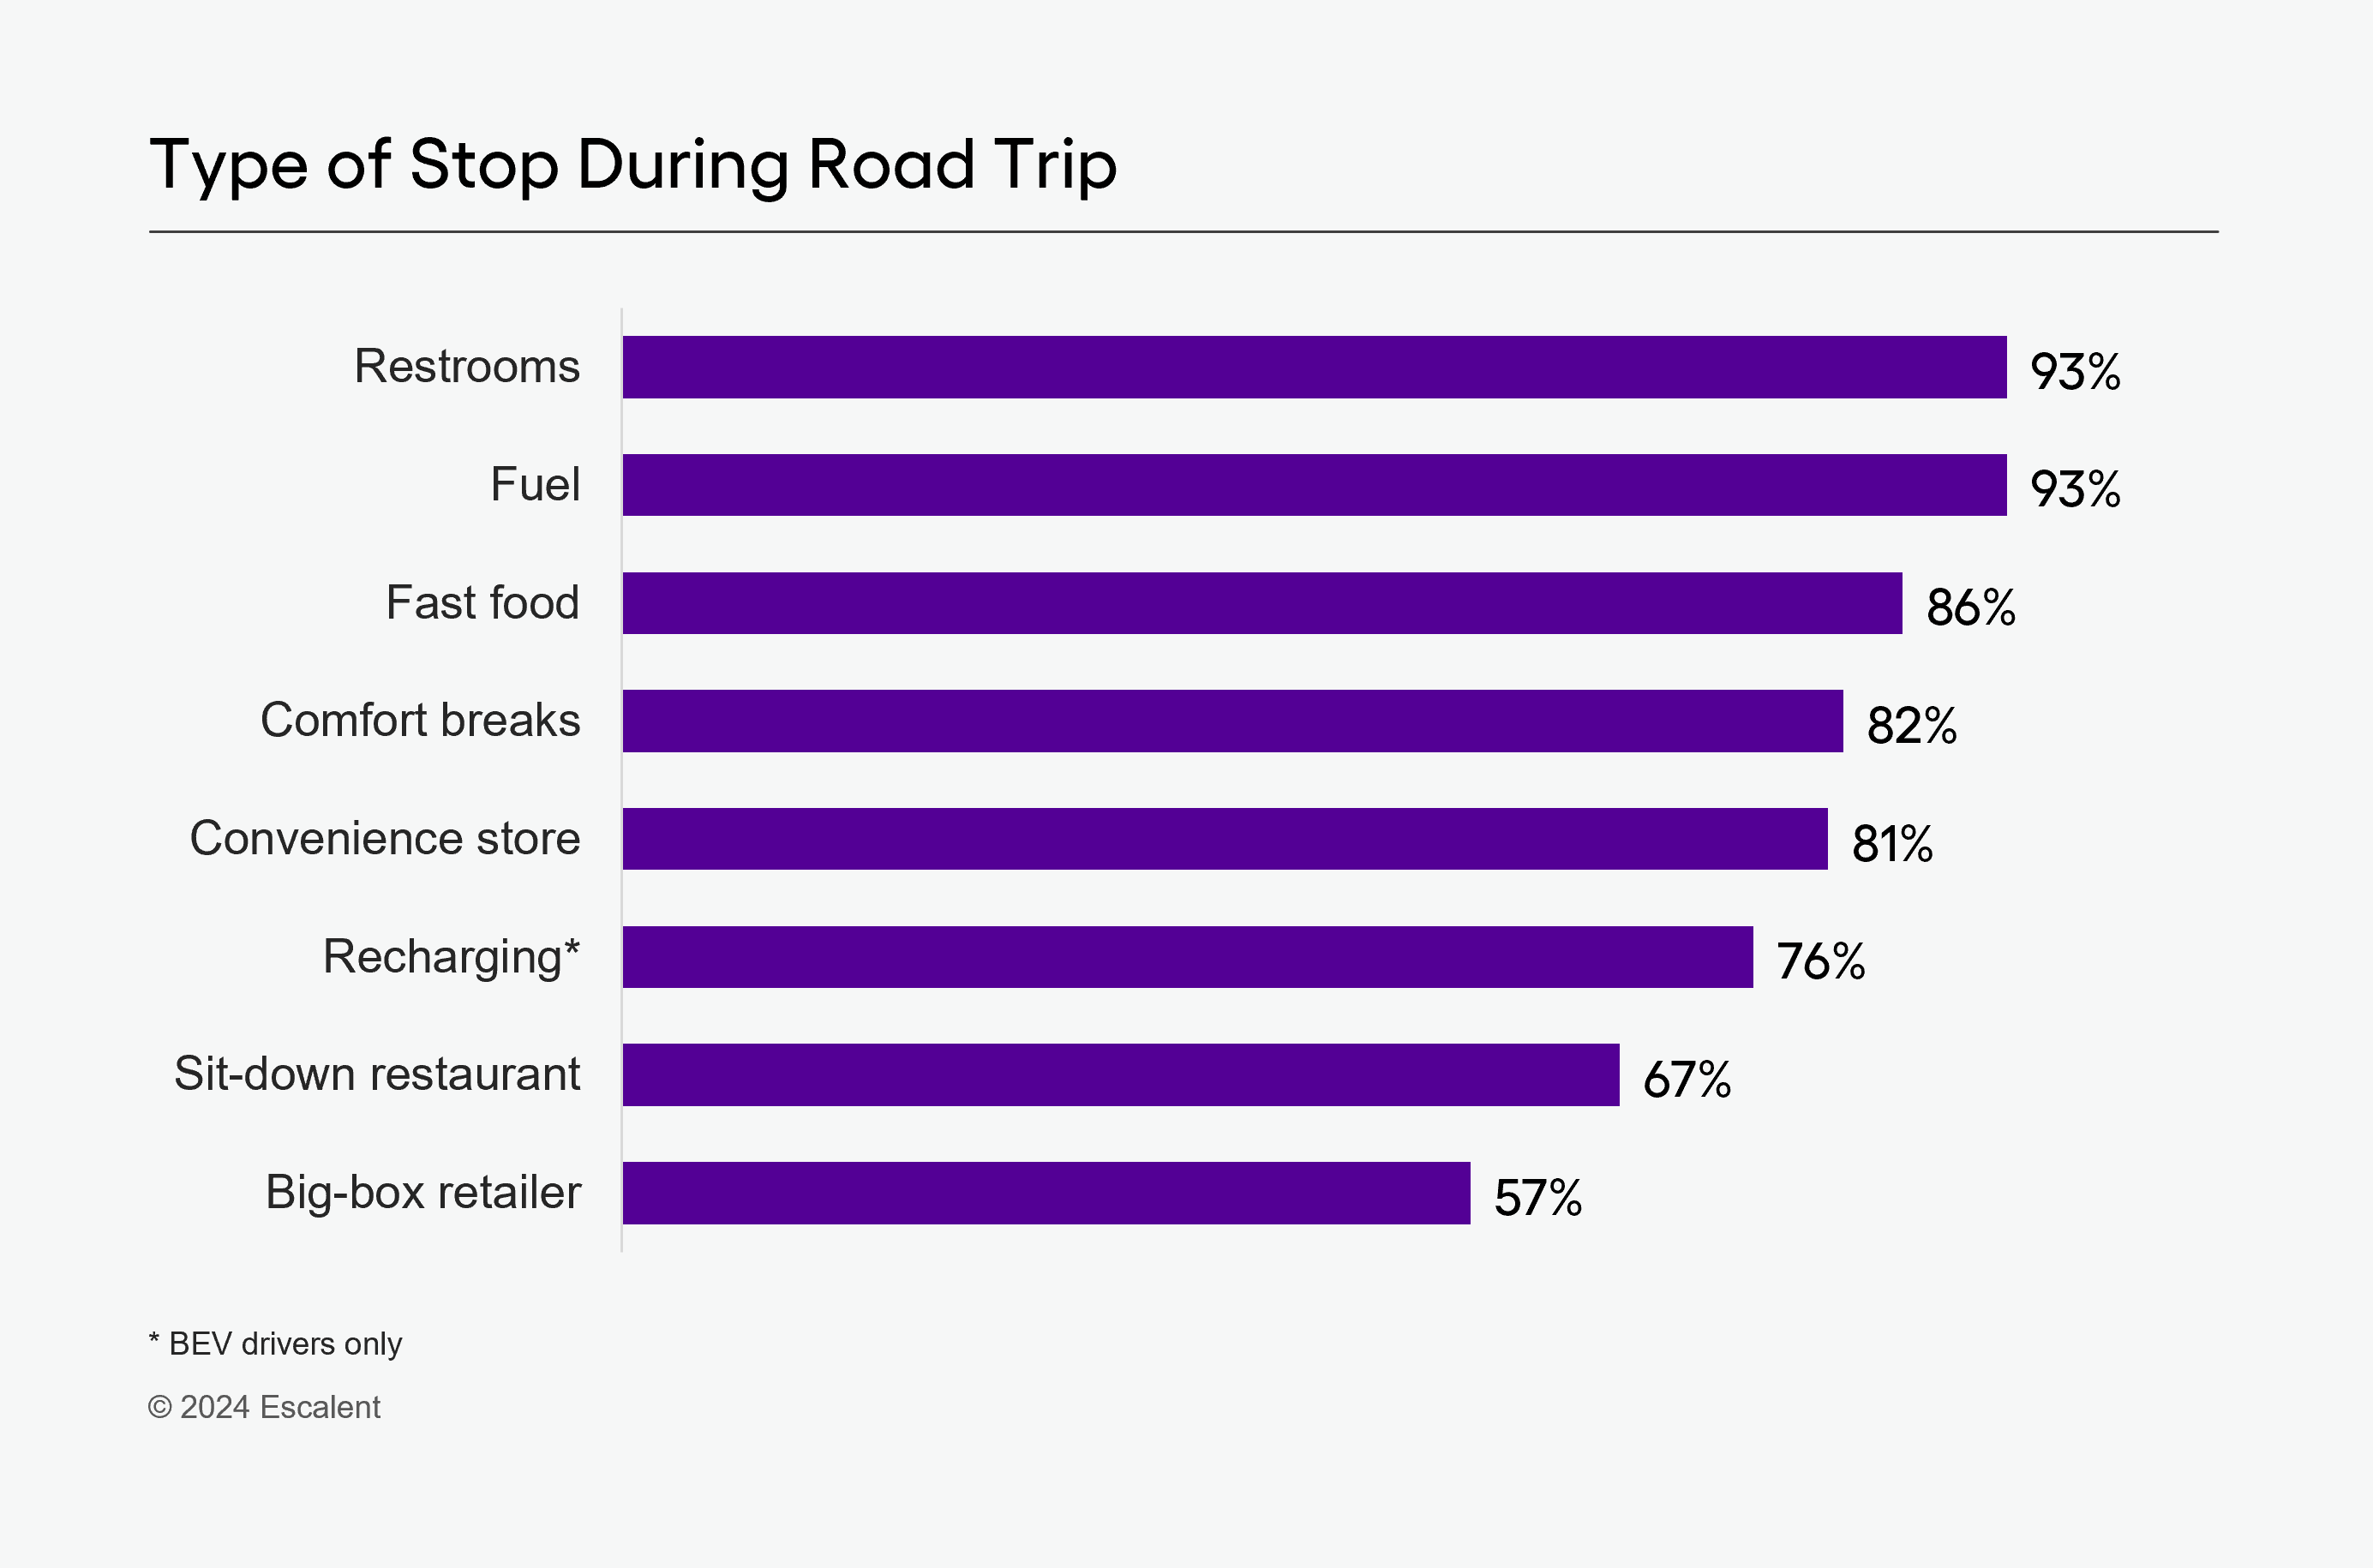 An image of a bar graph depicting Type of Stop During Road Trip data from Escalent